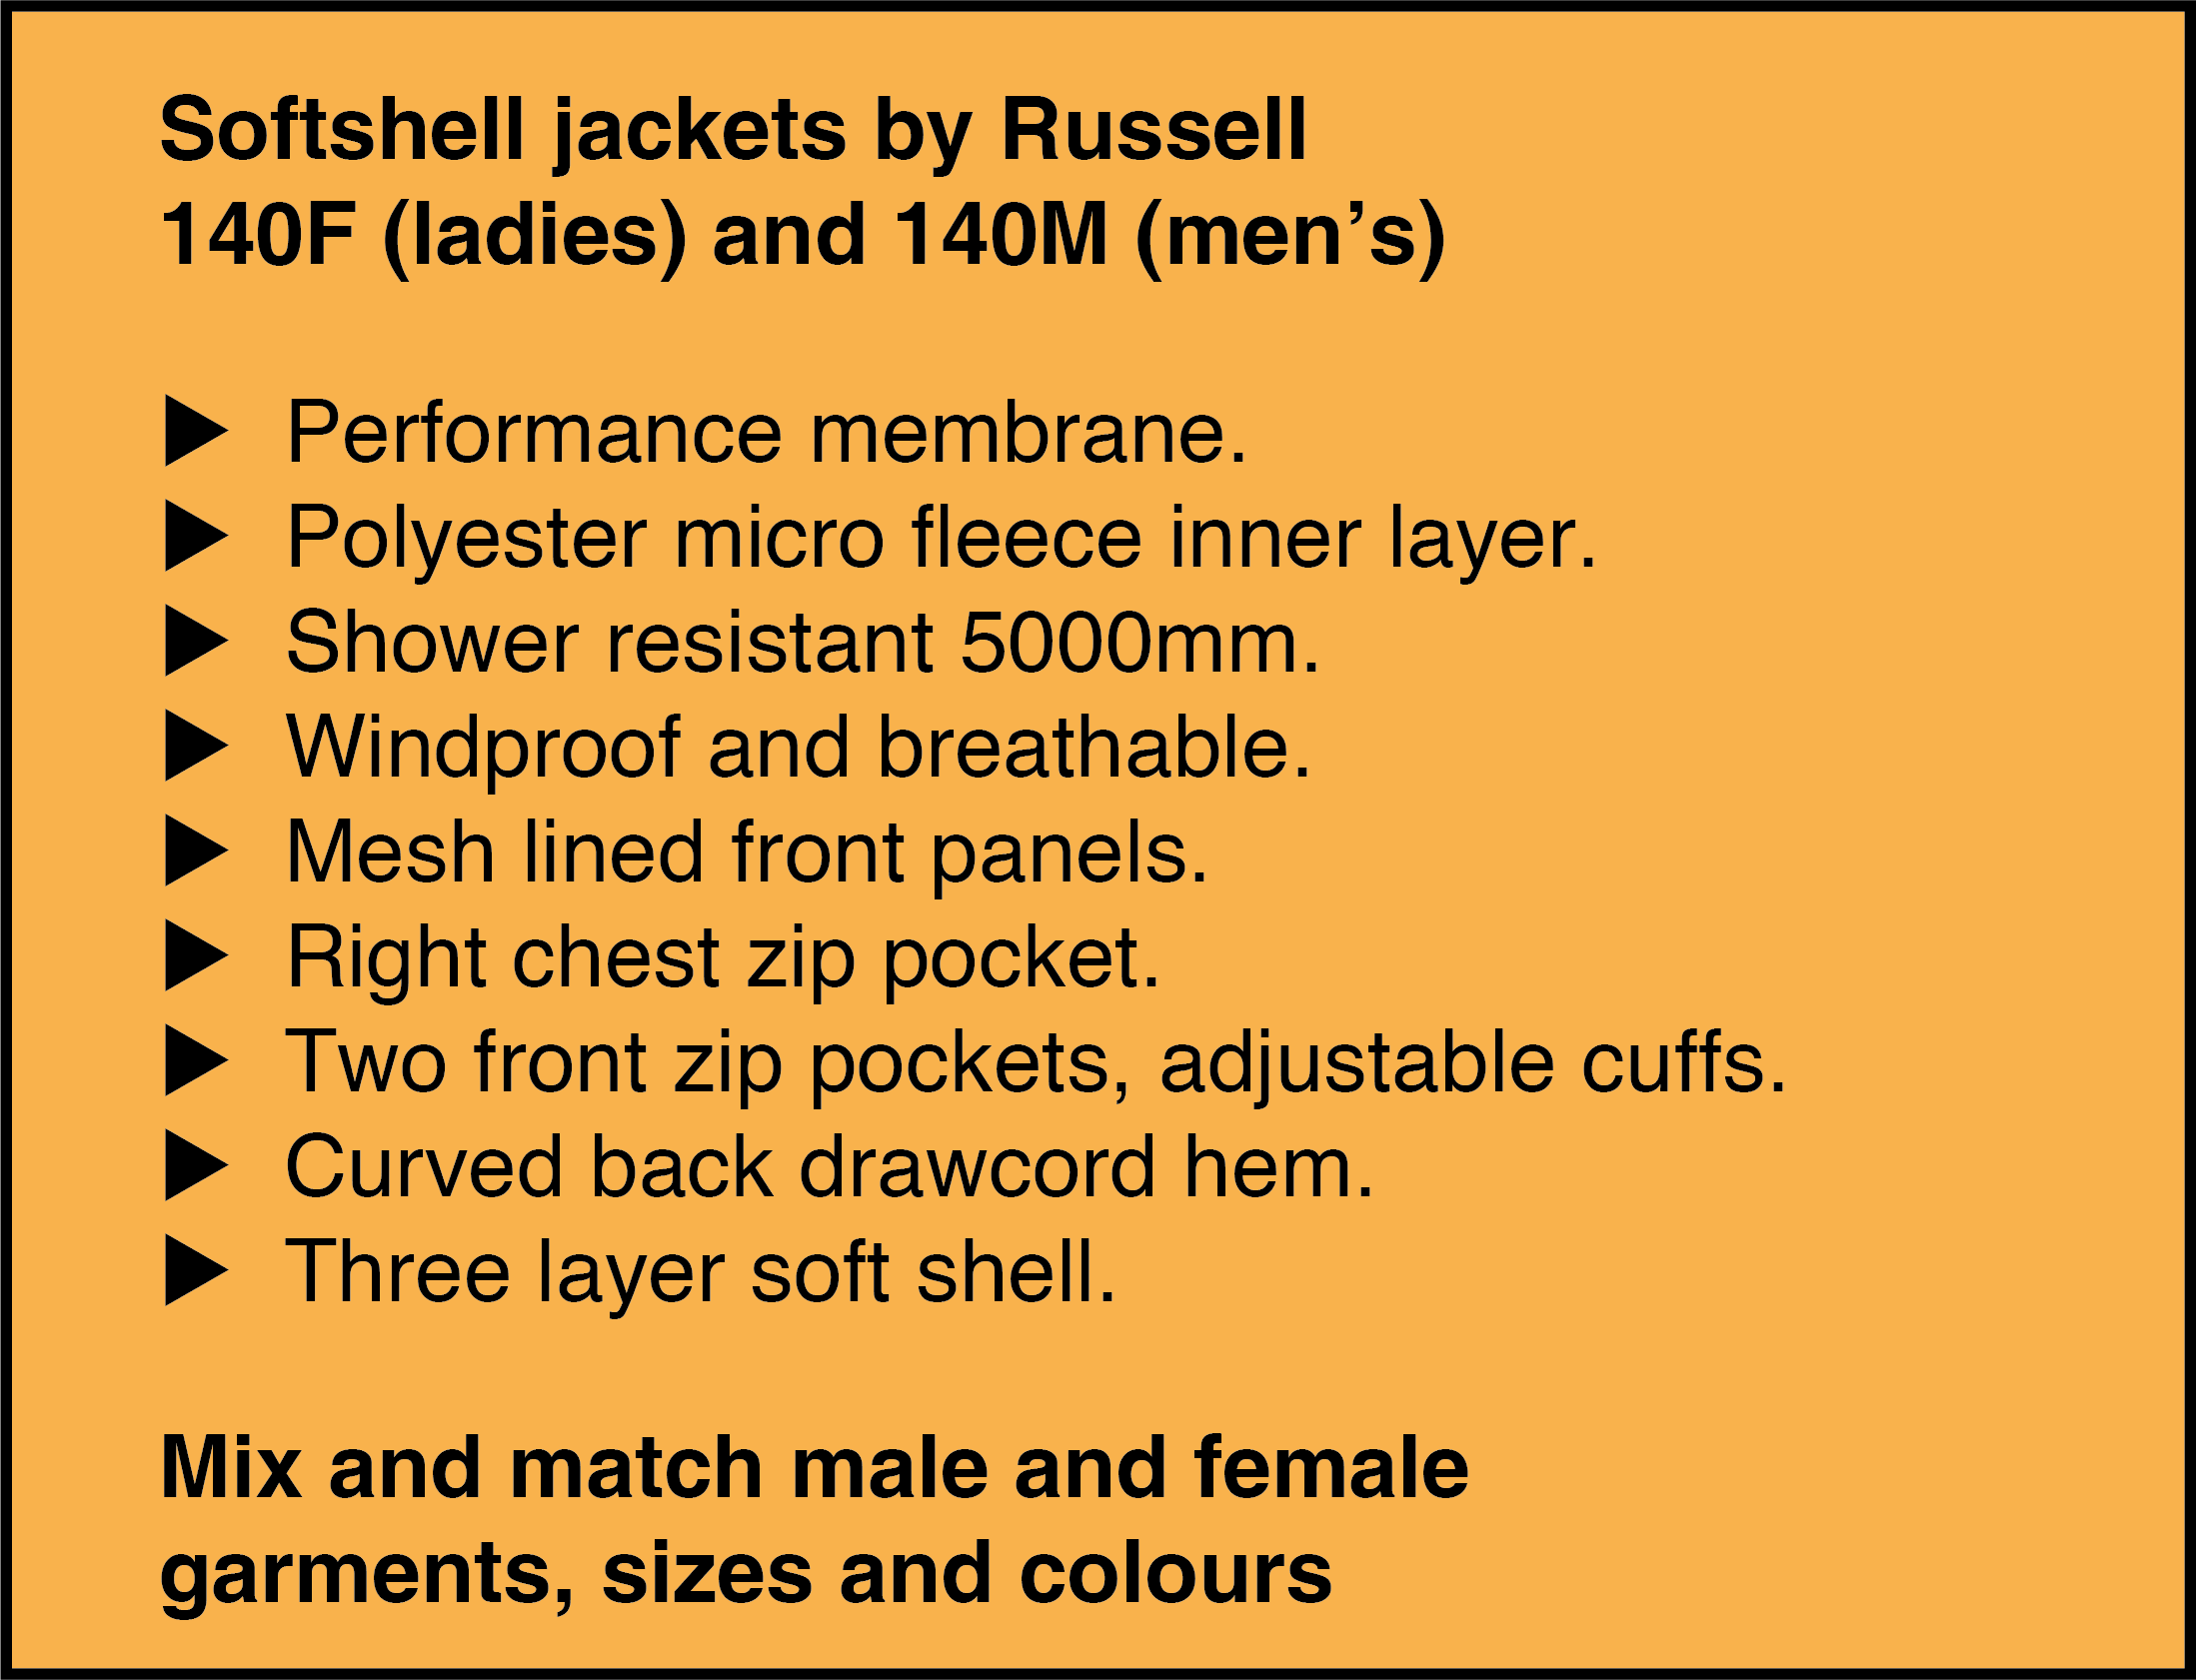 Click to see softshell spec.